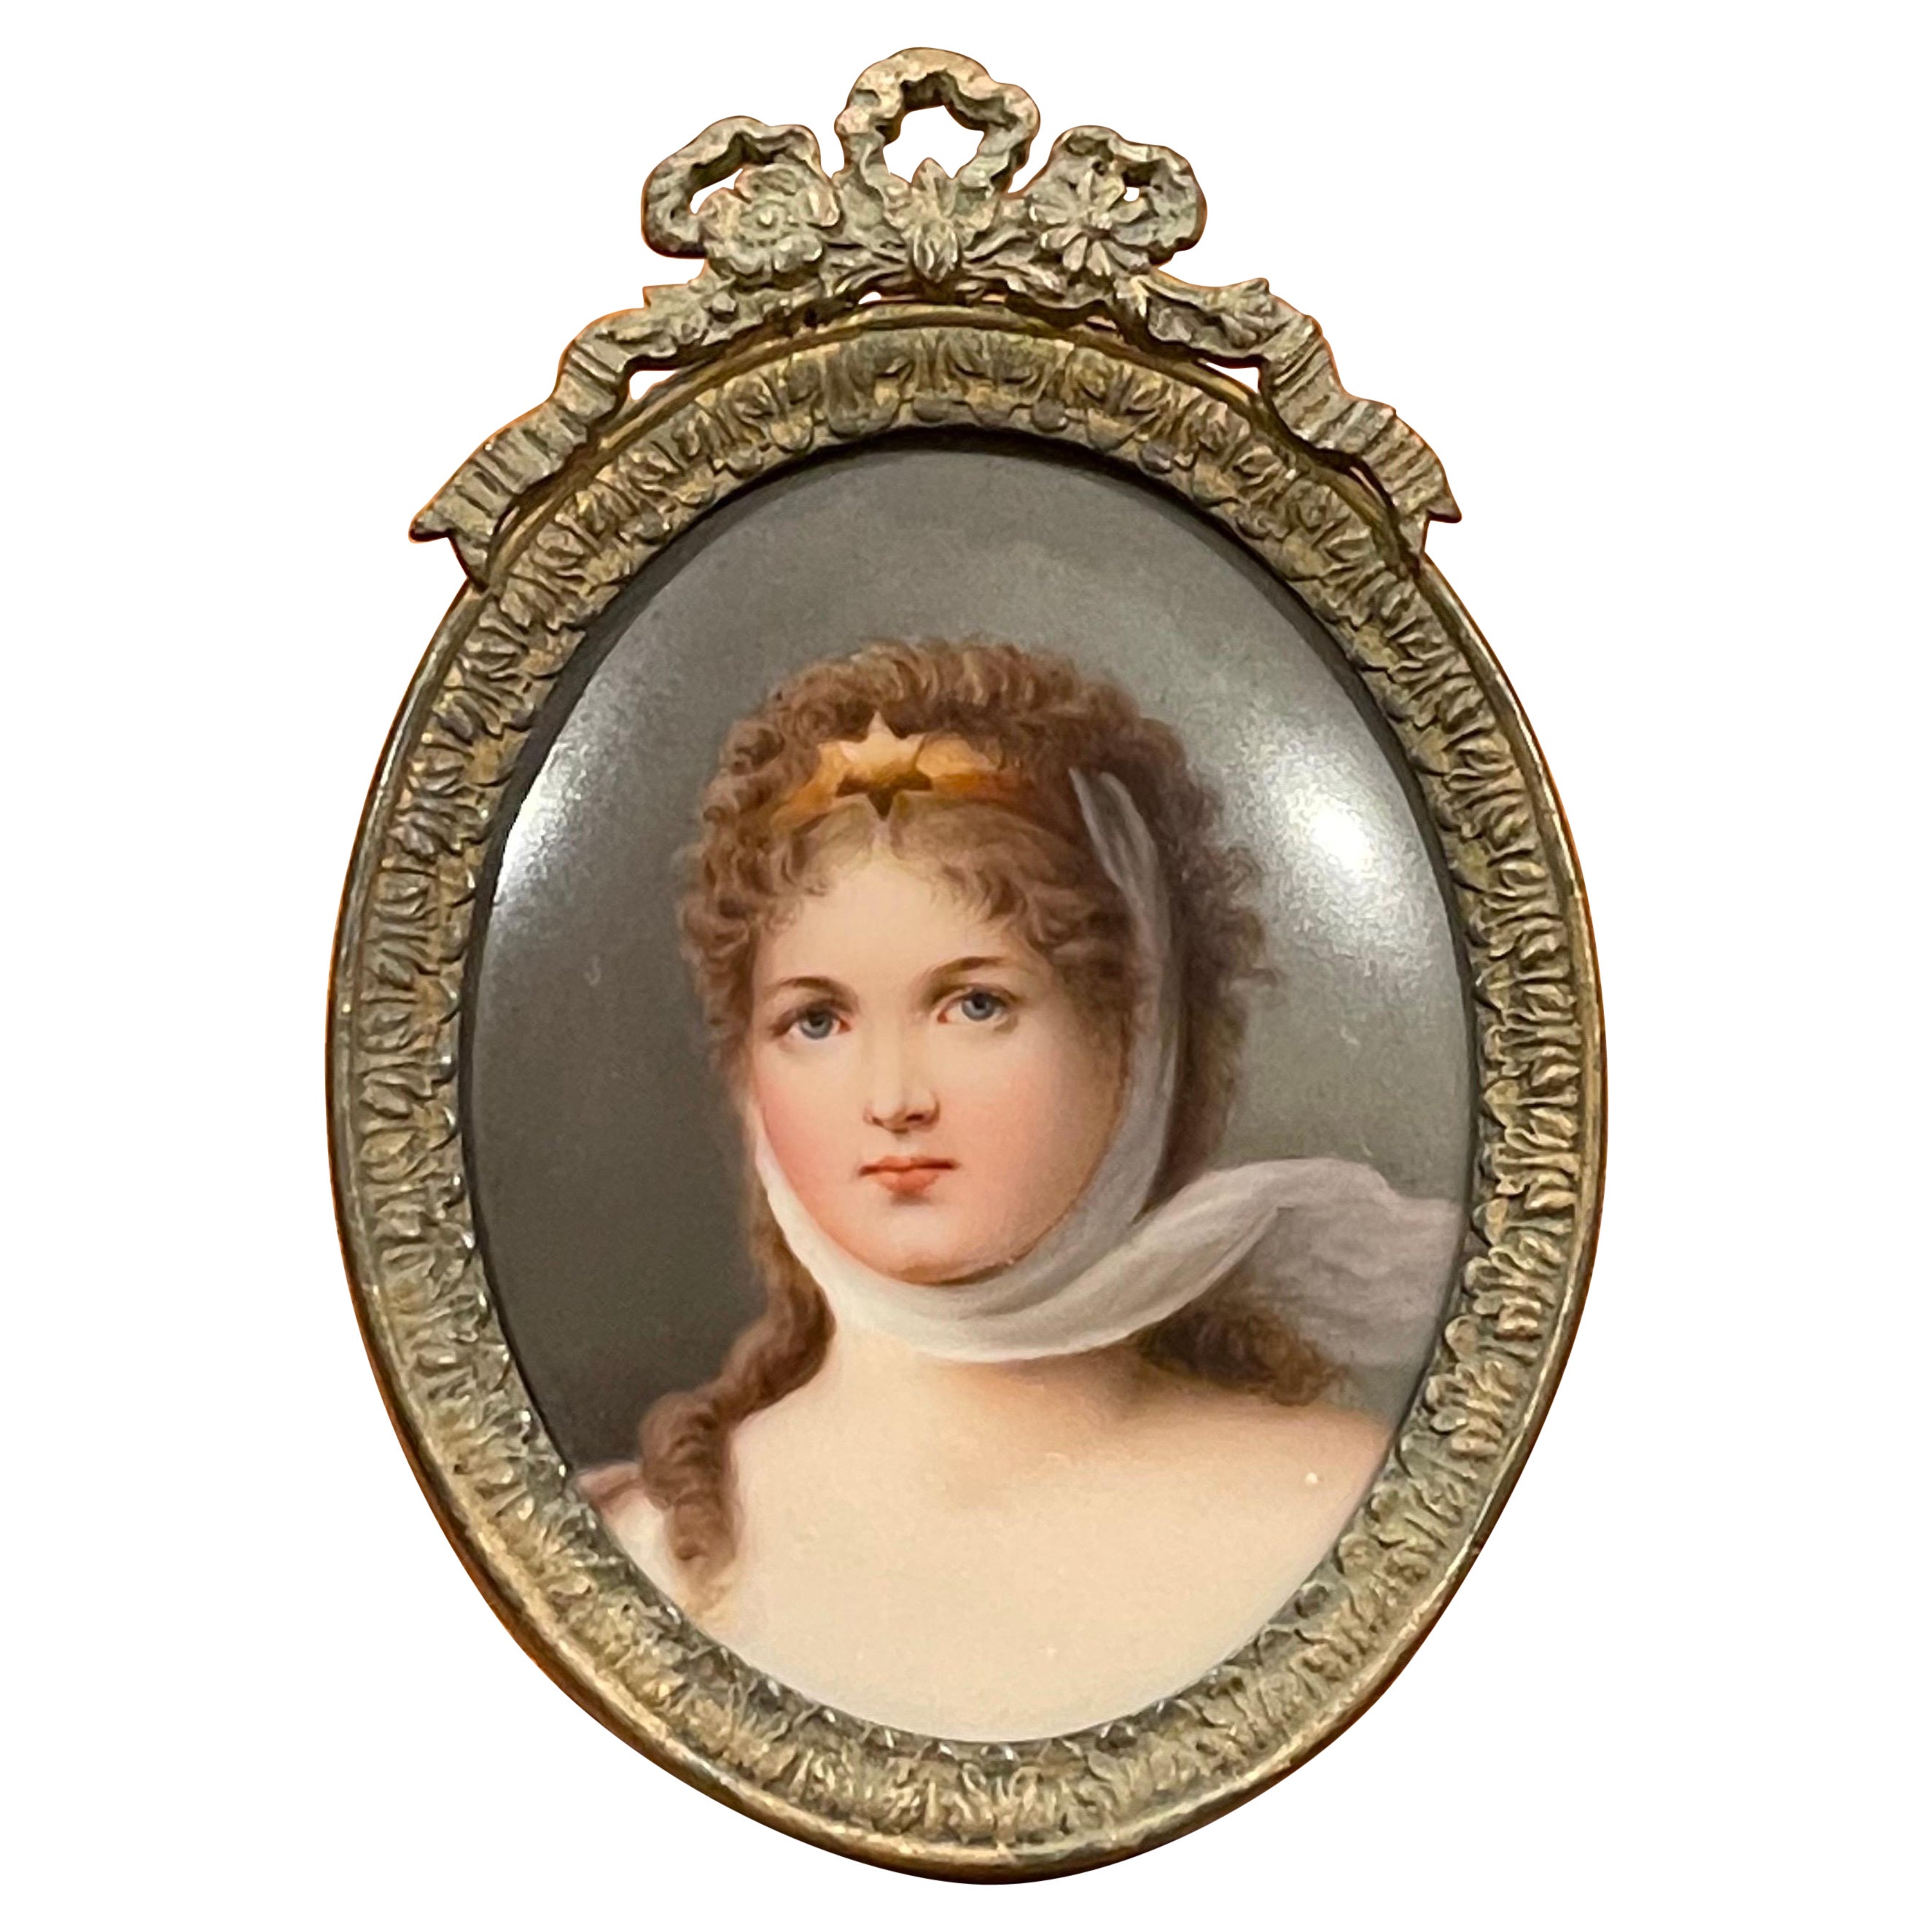 Antique Hand Painted Miniature Portrait on Porcelain in a Brass Easel Frame